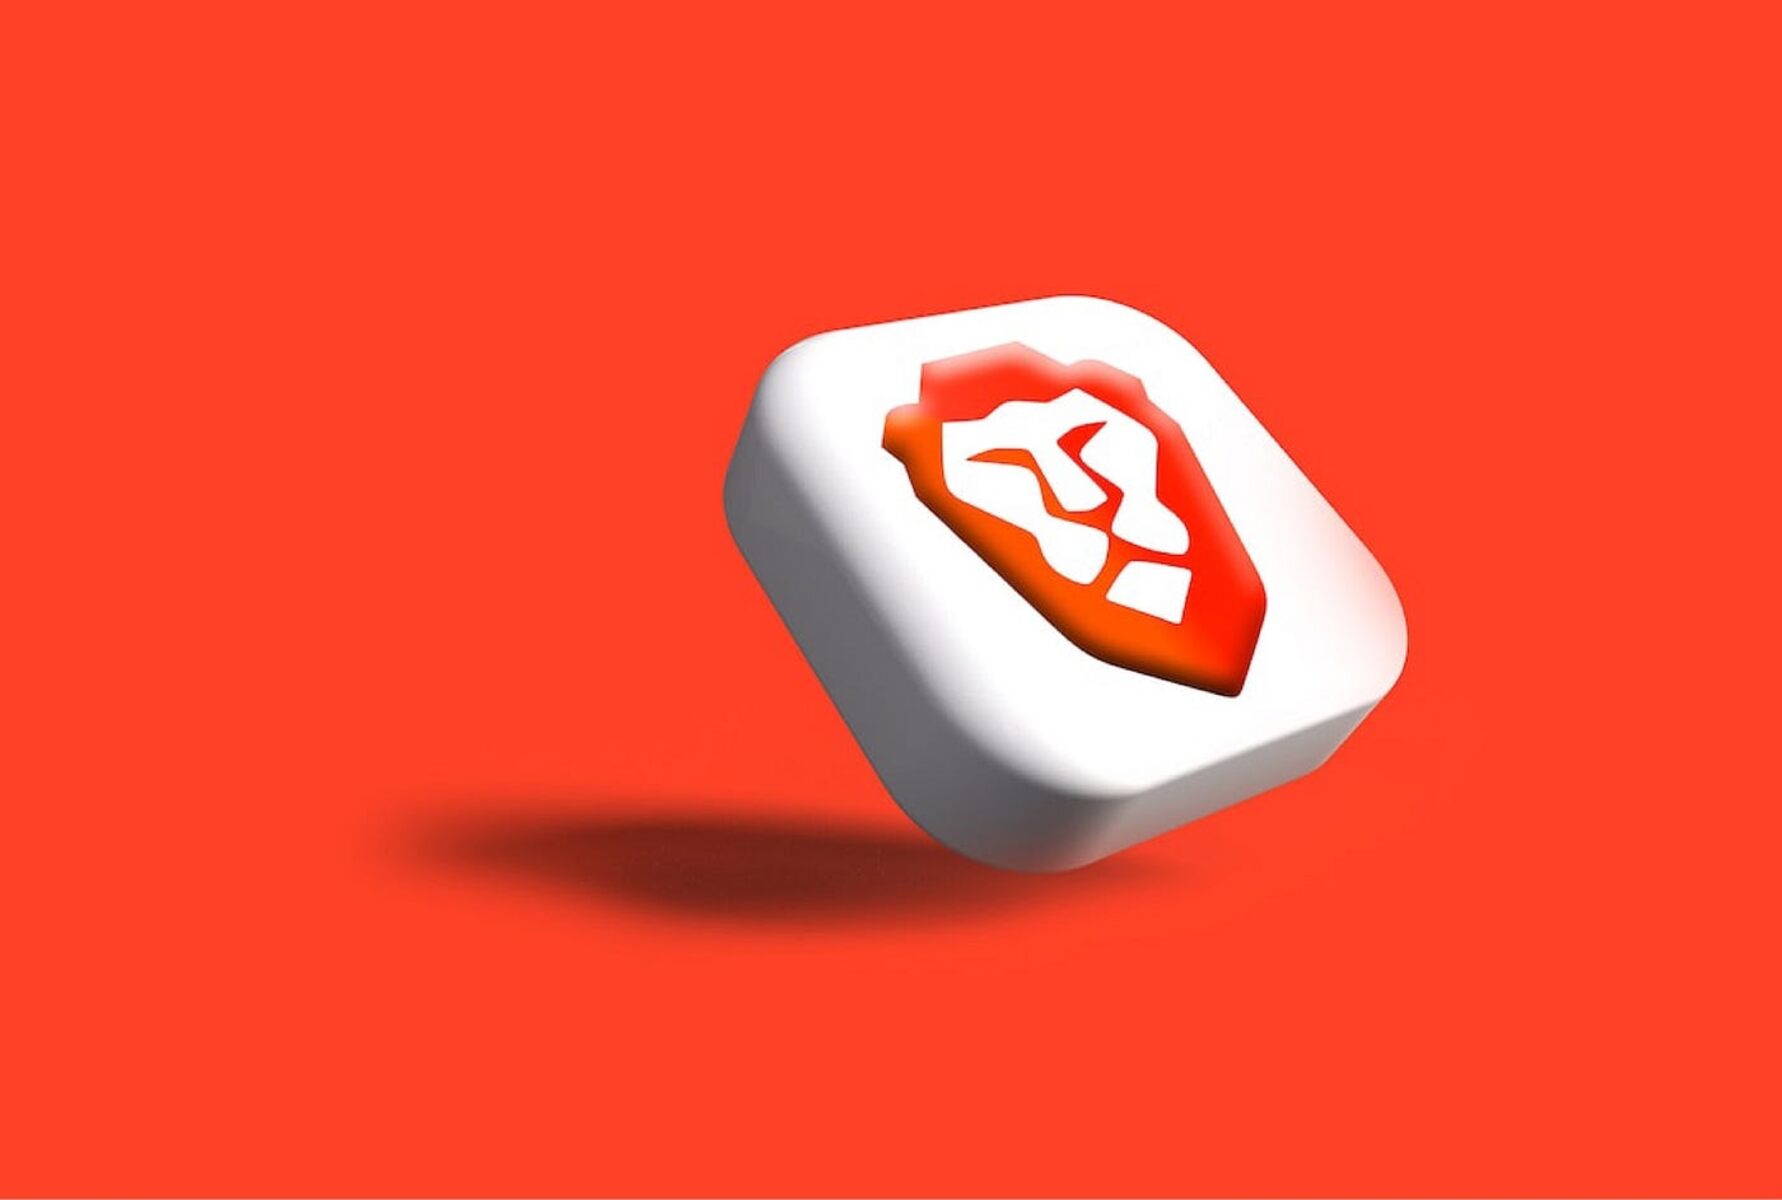 Why Use Brave Browser